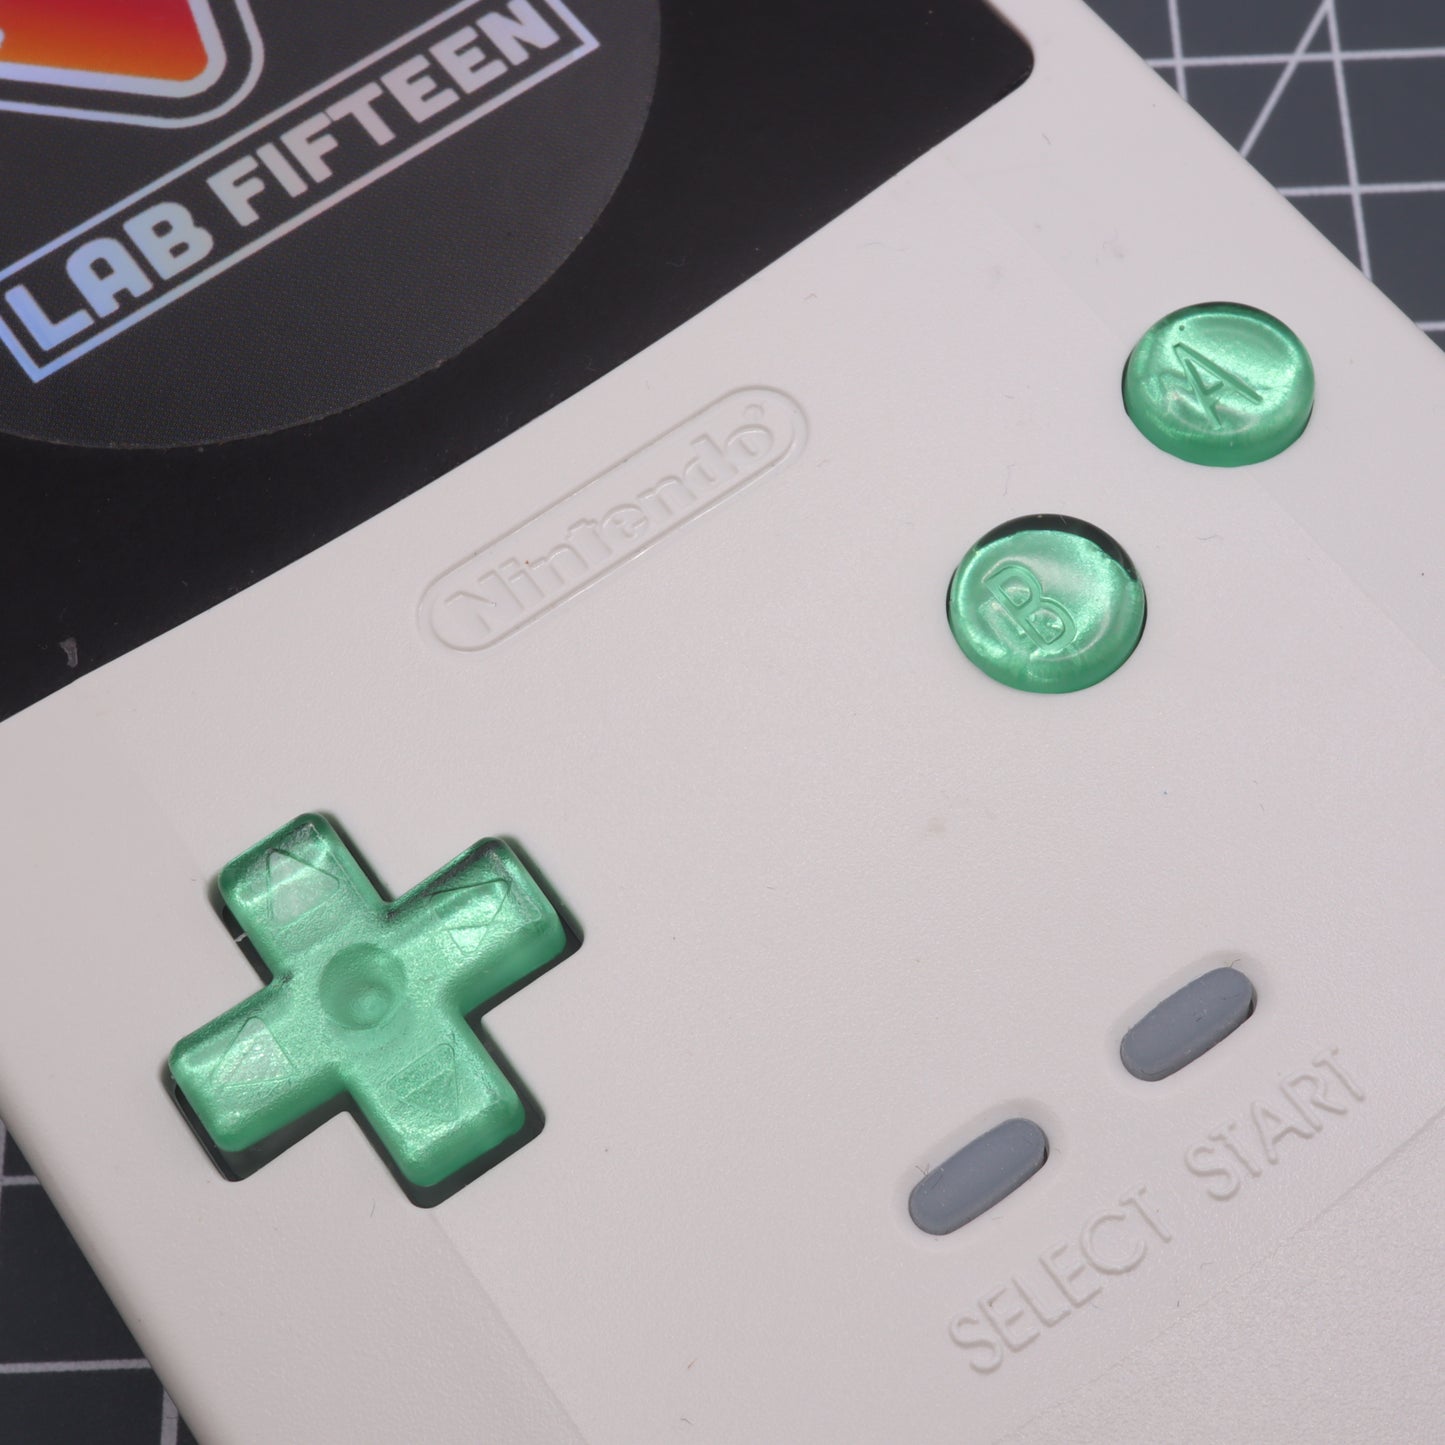 Game Boy Color button set with lab fifteen co chrome mint green custom buttons inside white console